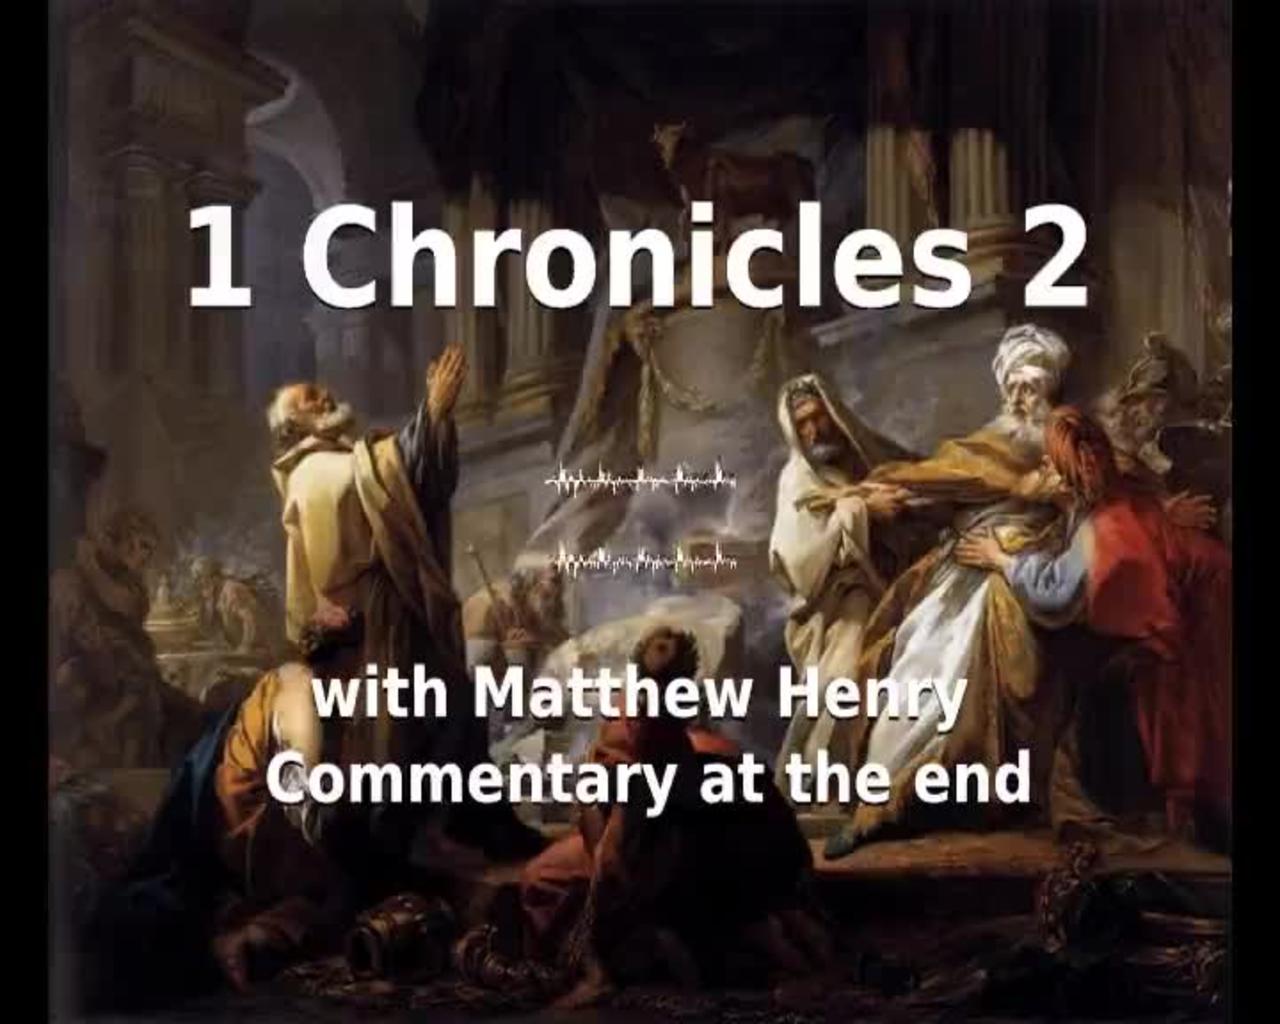 📖🕯 Holy Bible - 1 Chronicles 2 with Matthew Henry Commentary at the end.